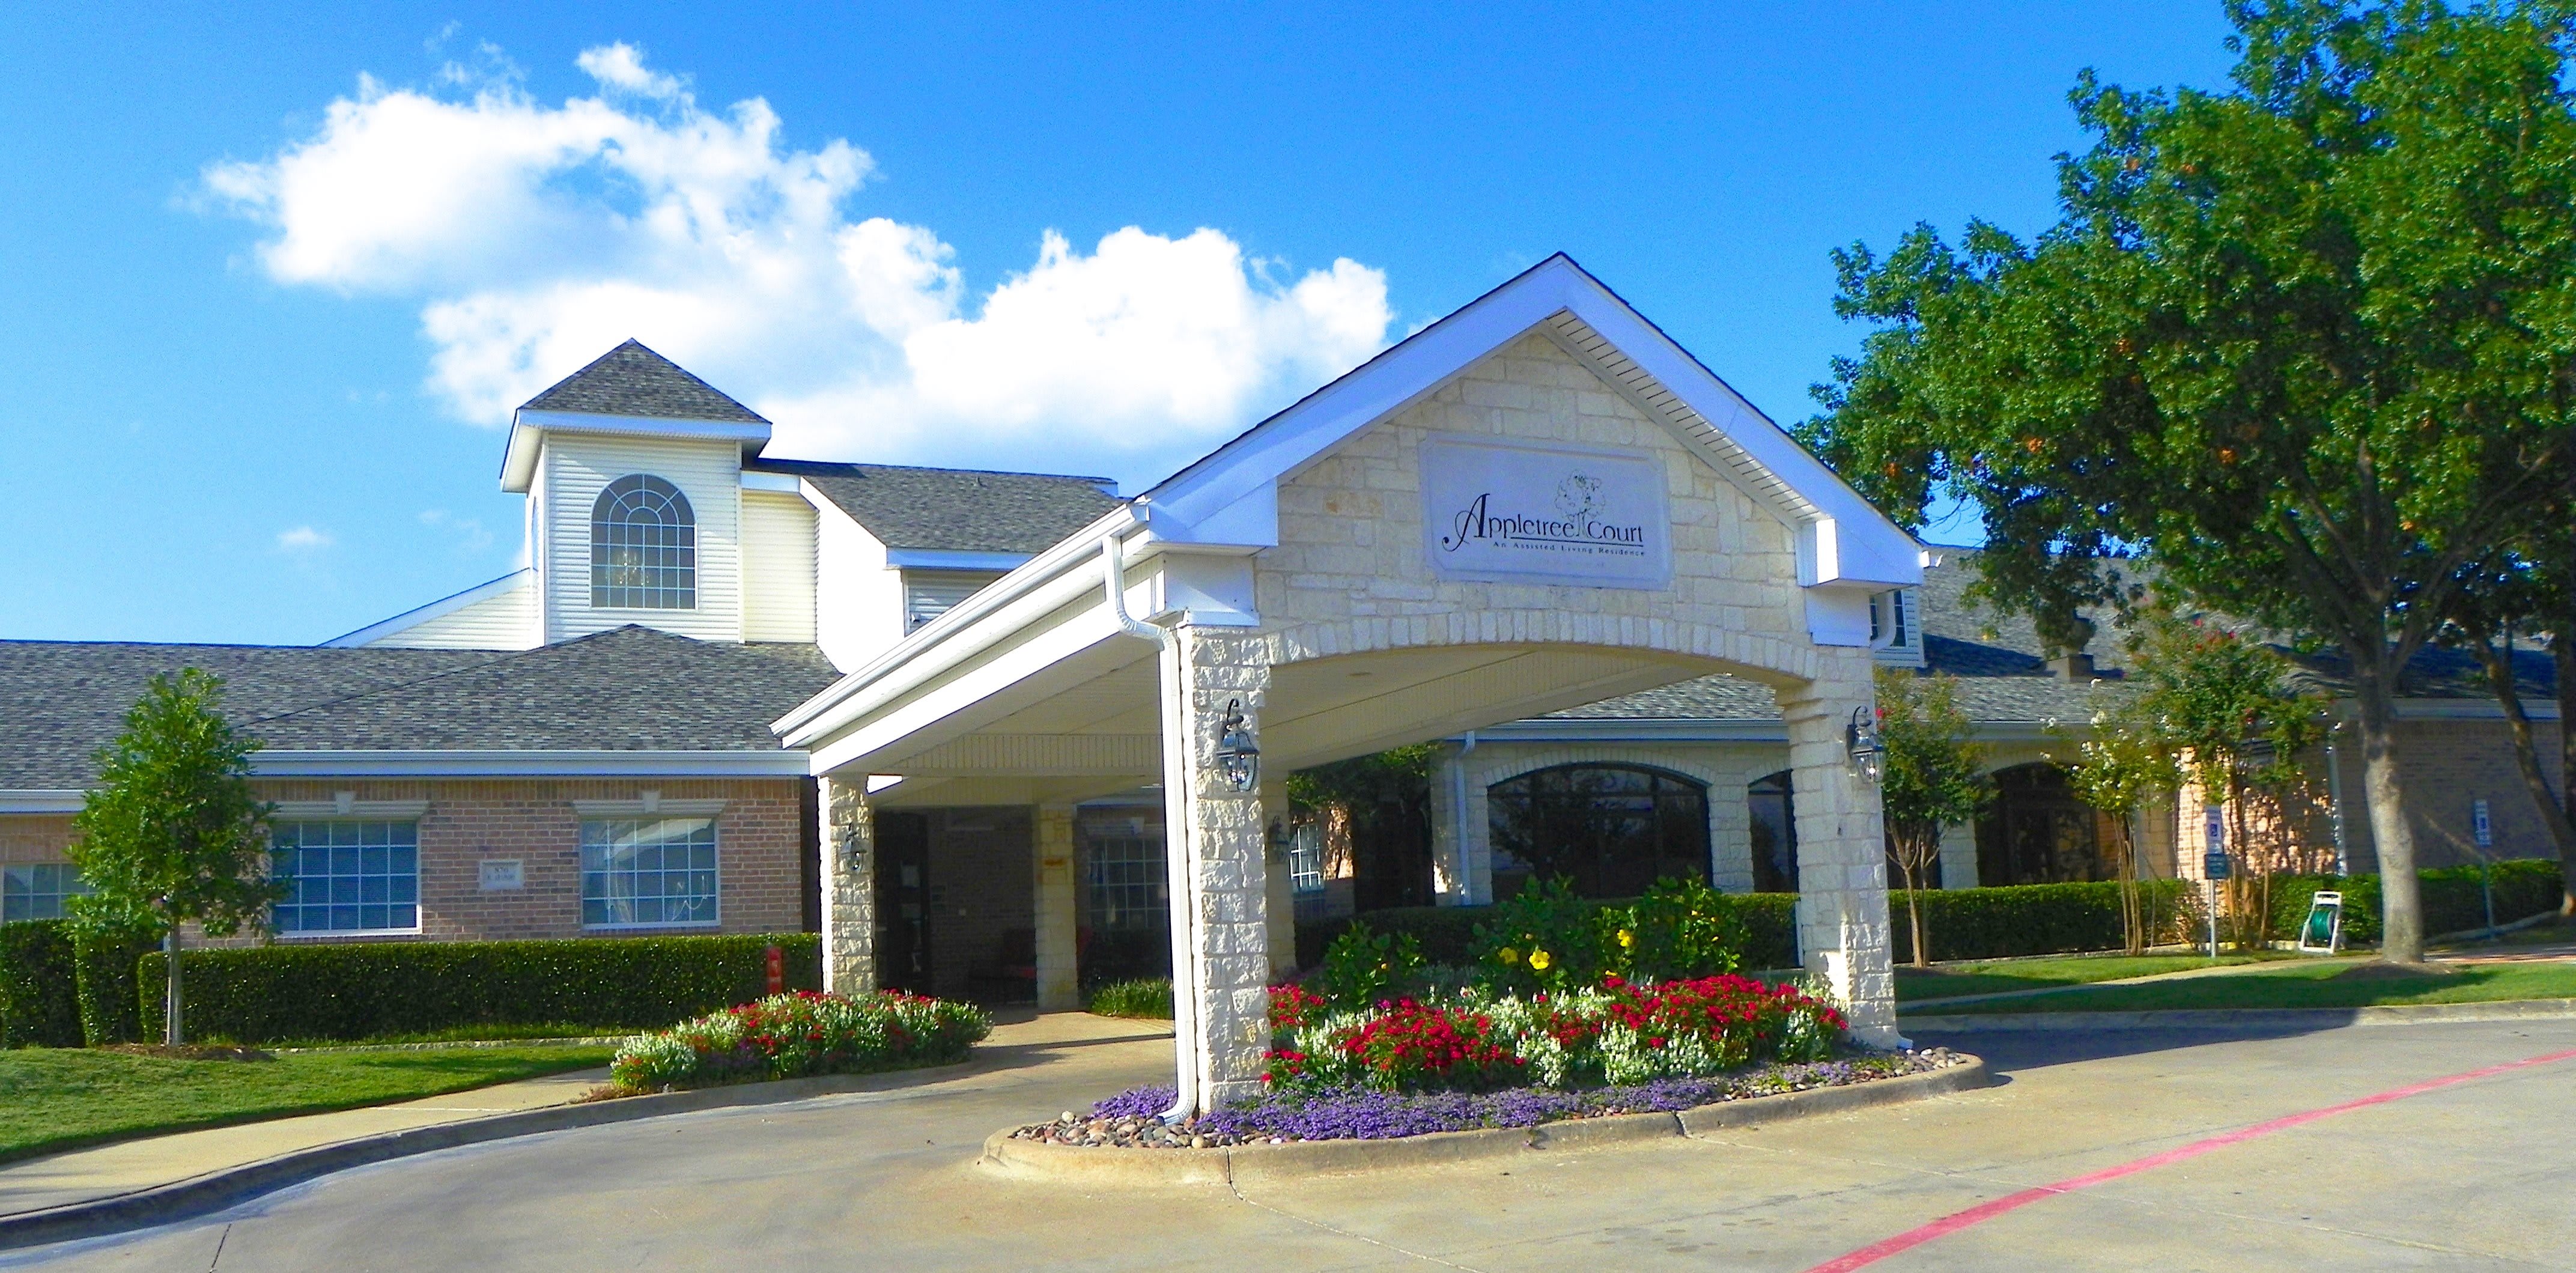 Appletree Court Assisted Living community exterior